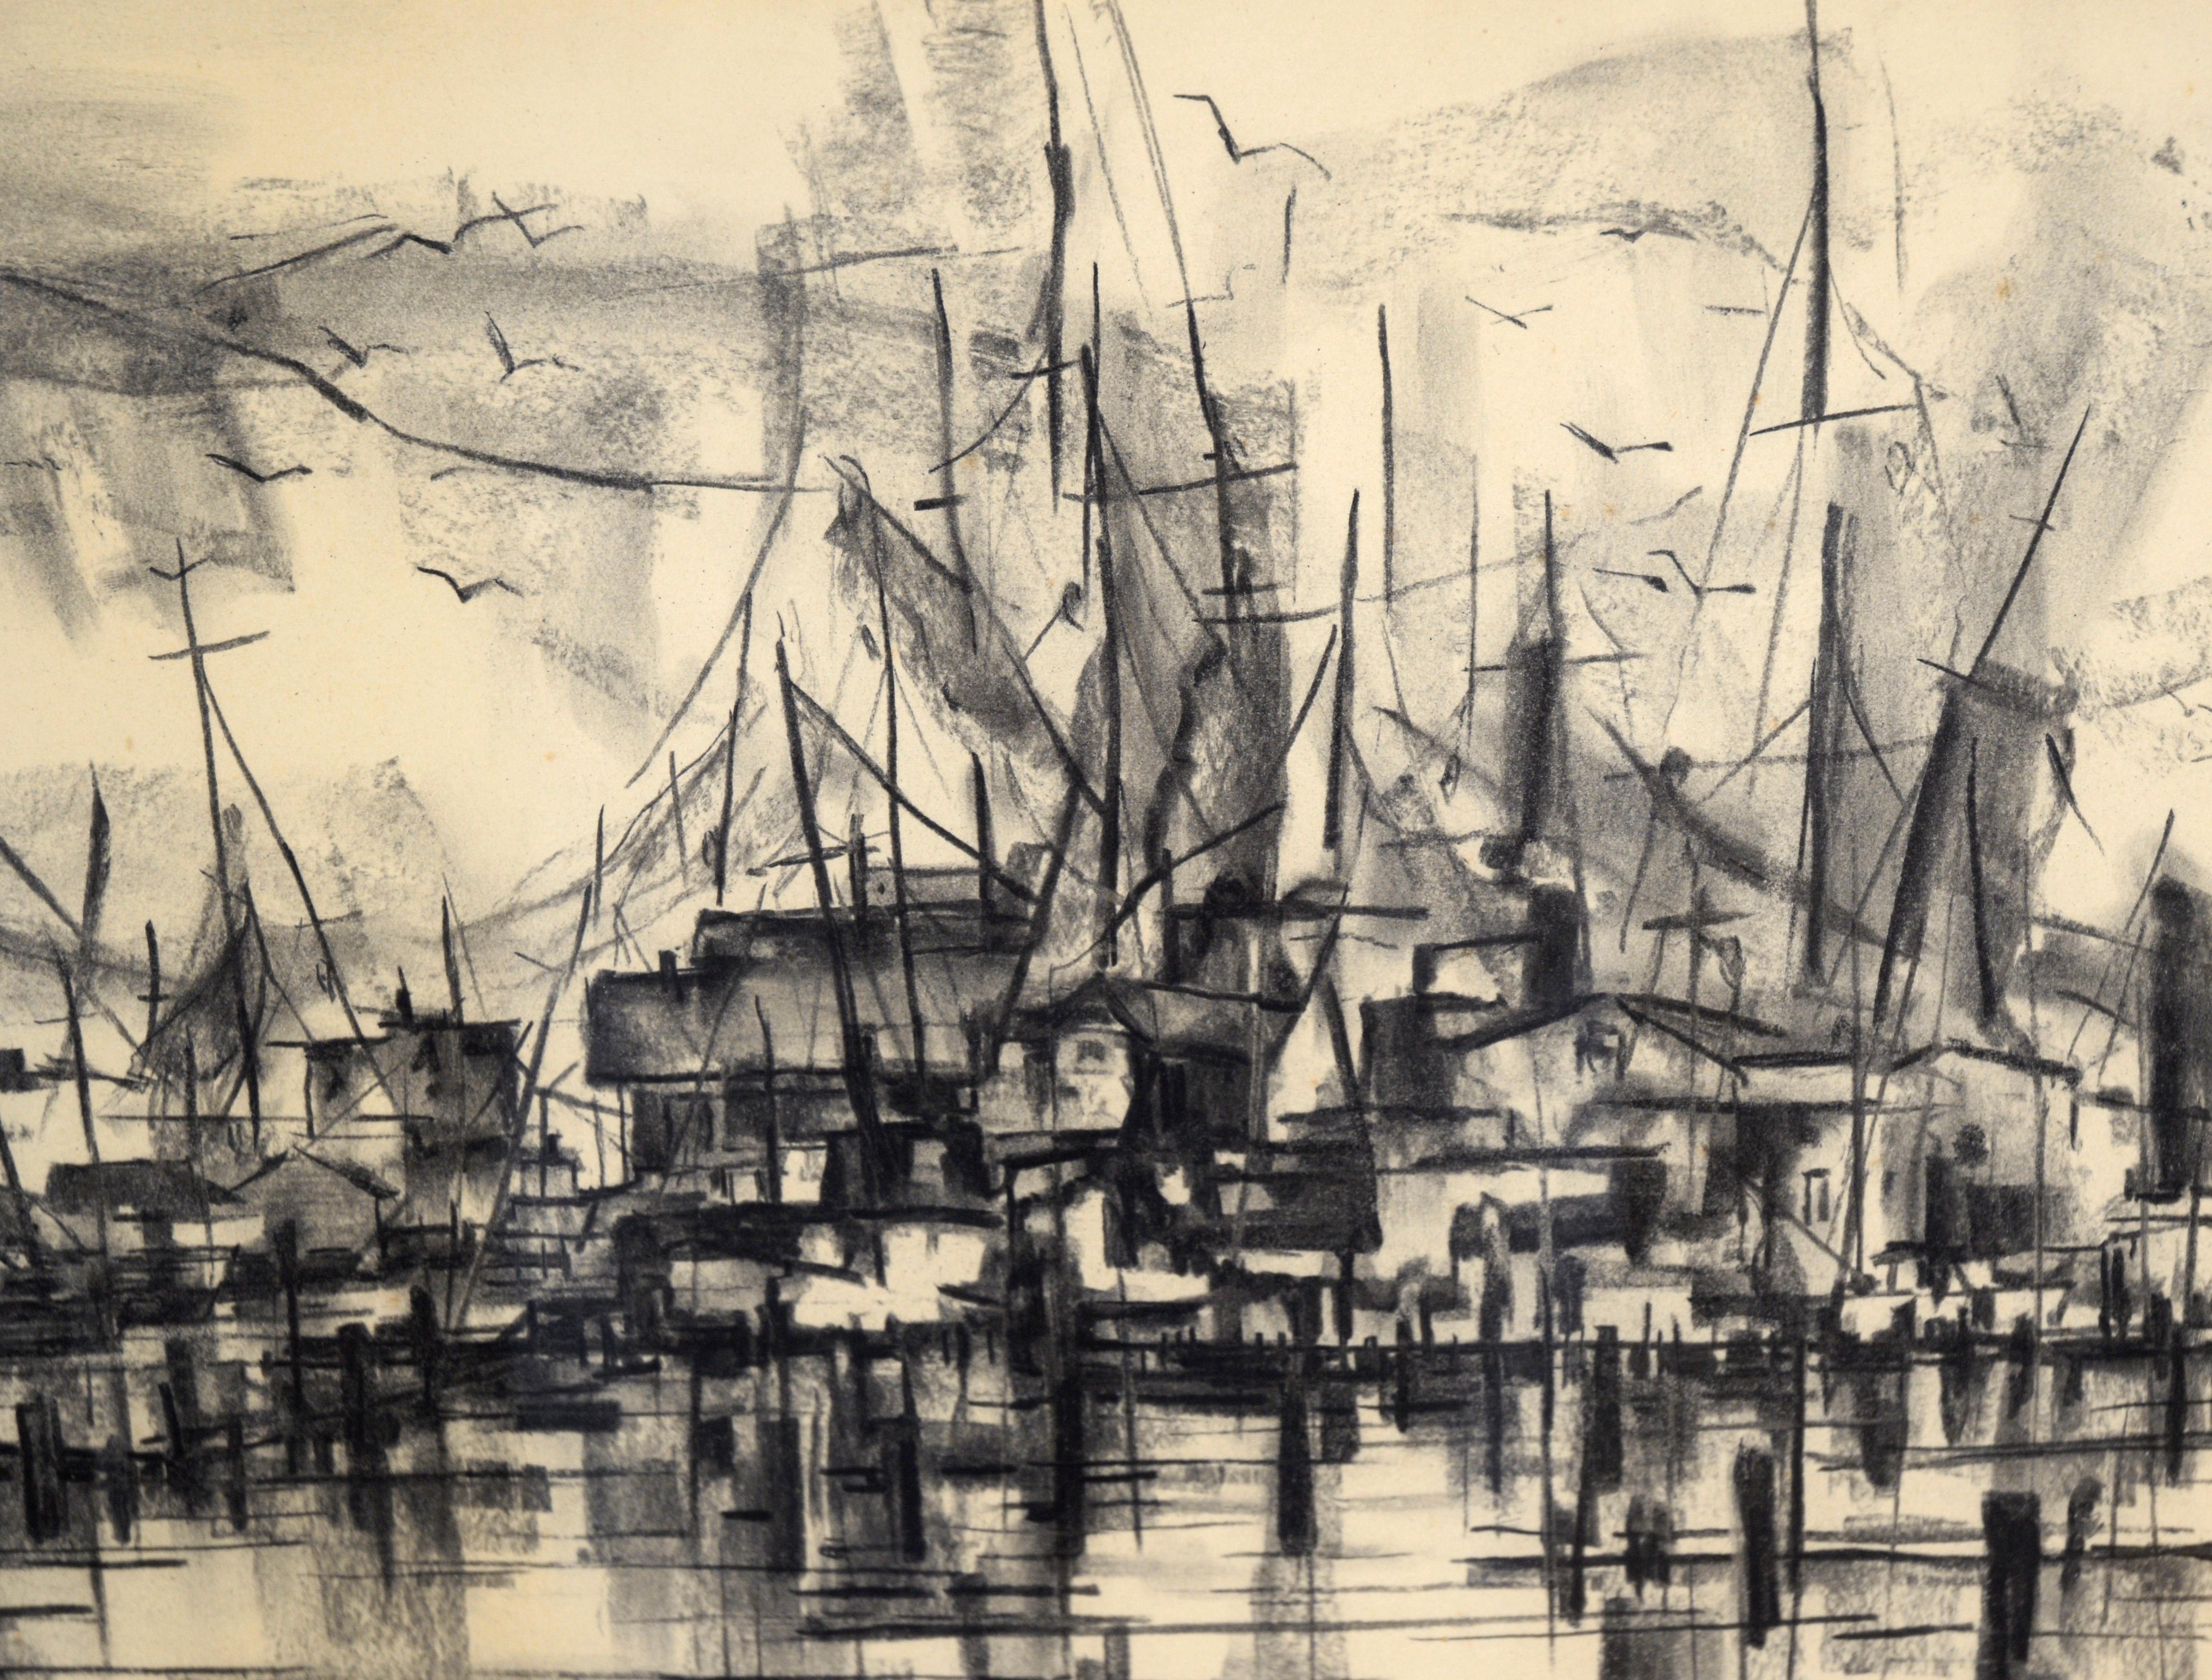 Ships at the Harbor - Nautical Seascape with Seagulls in Charcoal on Paper - American Impressionist Art by Maude Folmar Ramsey